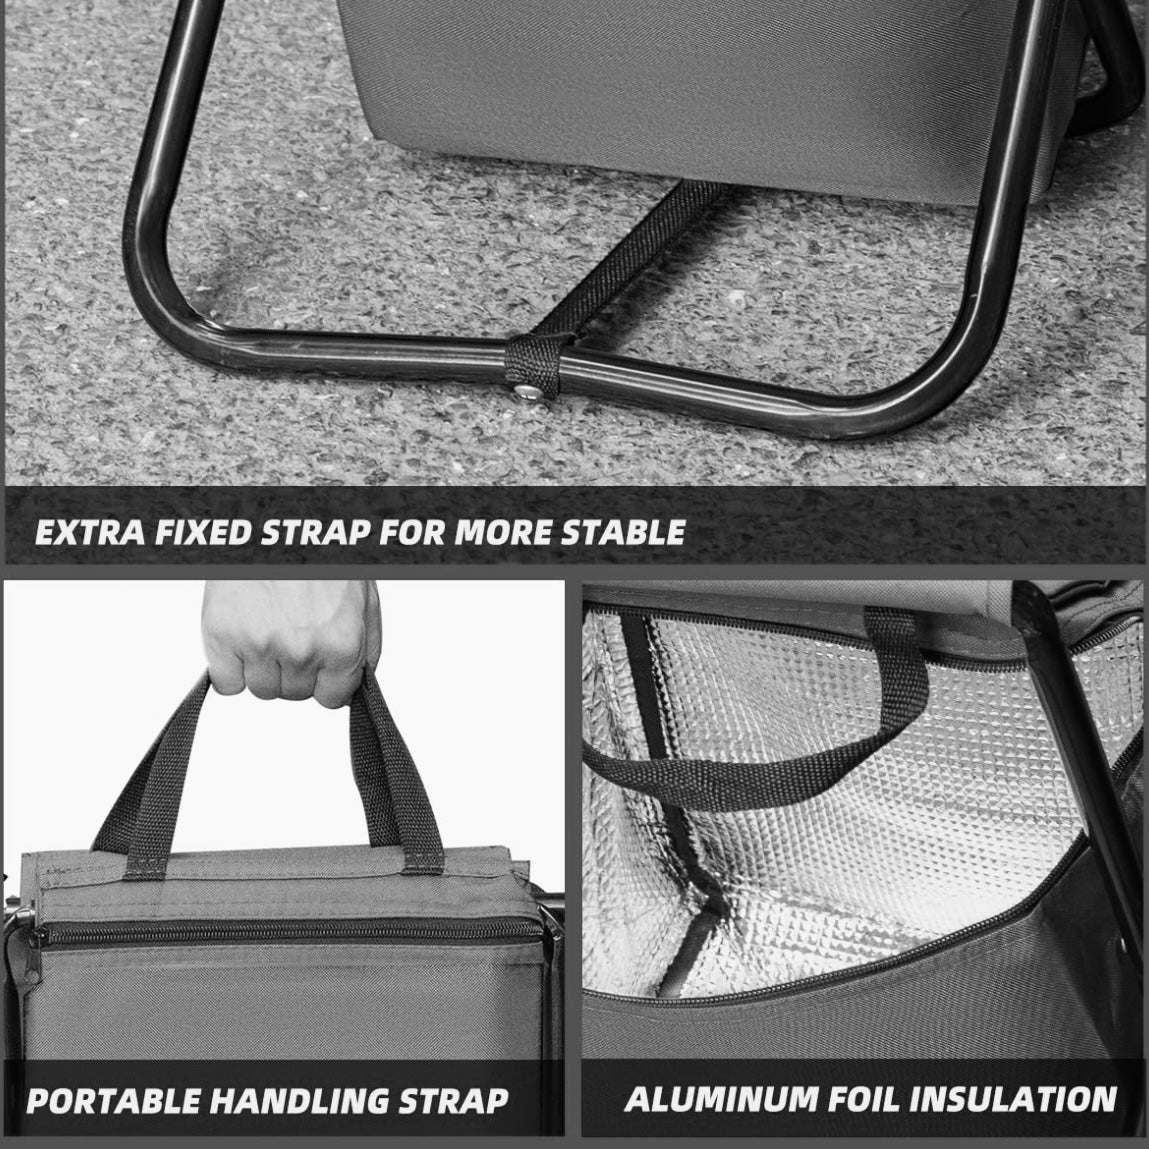 Collapsible Fishing Camping Chair With Attached Cooler - Great For Outdoor Concerts!